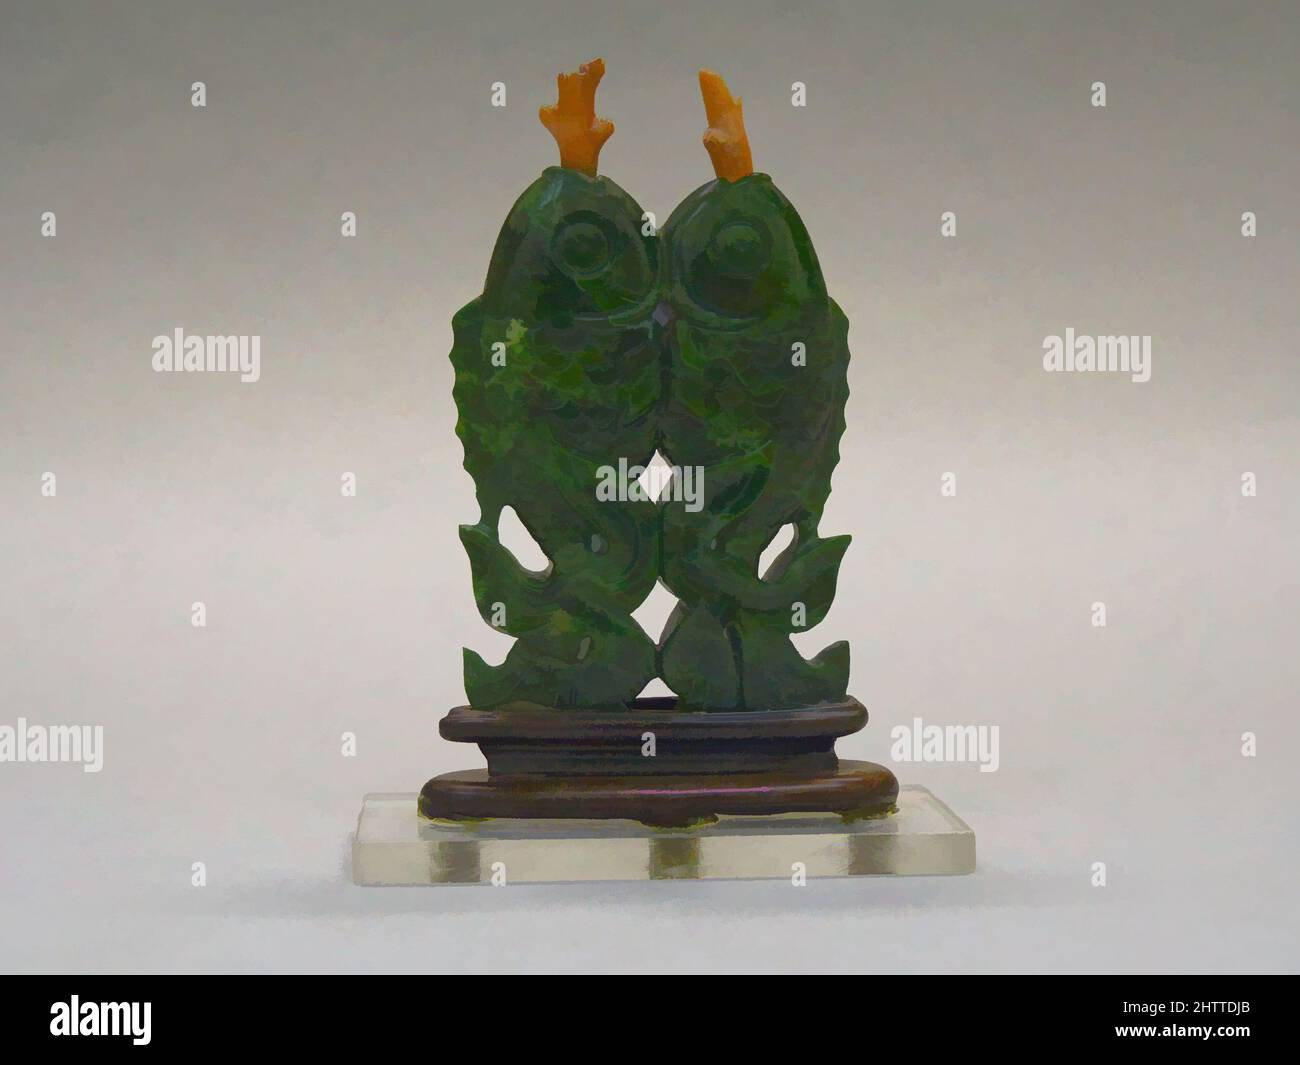 Art inspired by Double Snuff Bottle, Qing dynasty (1644–1911), 19th century, China, Chloromelanite jadeite with coral stoppers; wood stand, H. 2 7/8 in. (7.3 cm), Snuff Bottles, Classic works modernized by Artotop with a splash of modernity. Shapes, color and value, eye-catching visual impact on art. Emotions through freedom of artworks in a contemporary way. A timeless message pursuing a wildly creative new direction. Artists turning to the digital medium and creating the Artotop NFT Stock Photo